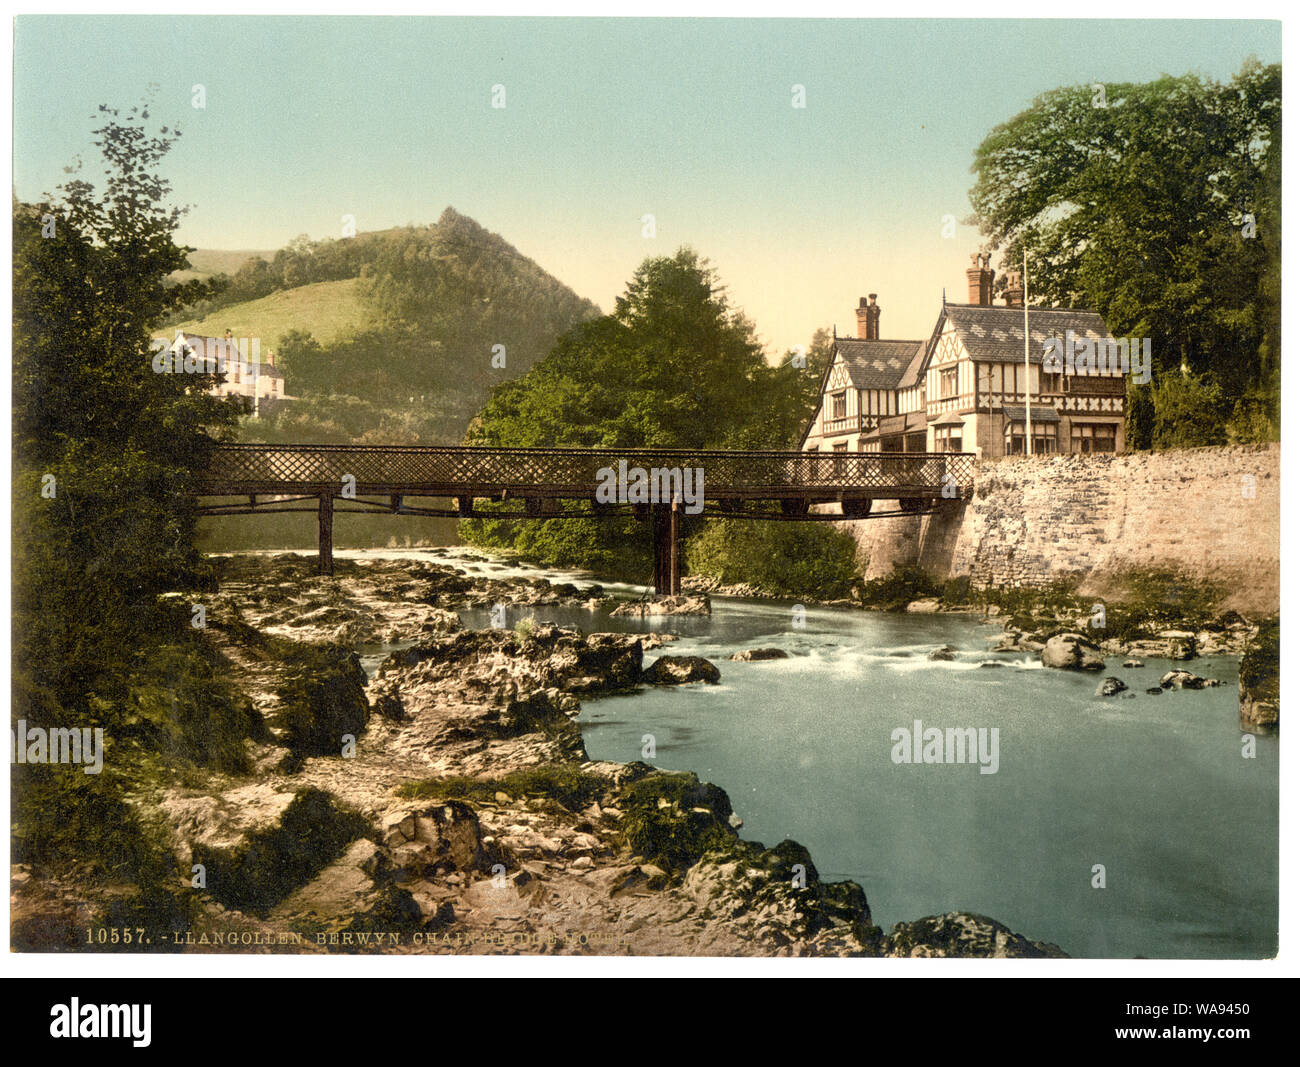 Chain Bridge Hotel, Berwyn Valley, Llangollen, Wales; Print no. 10557.; Title from the Detroit Publishing Co., catalogue J-foreign section. Detroit, Mich. : Detroit Photographic Company, 1905.; More information about the Photochrom Print Collection is available at http://hdl.loc.gov/loc.pnp/pp.pgz; Forms part of: Views of landscape and architecture in Wales in the Photochrom print collection. Stock Photo